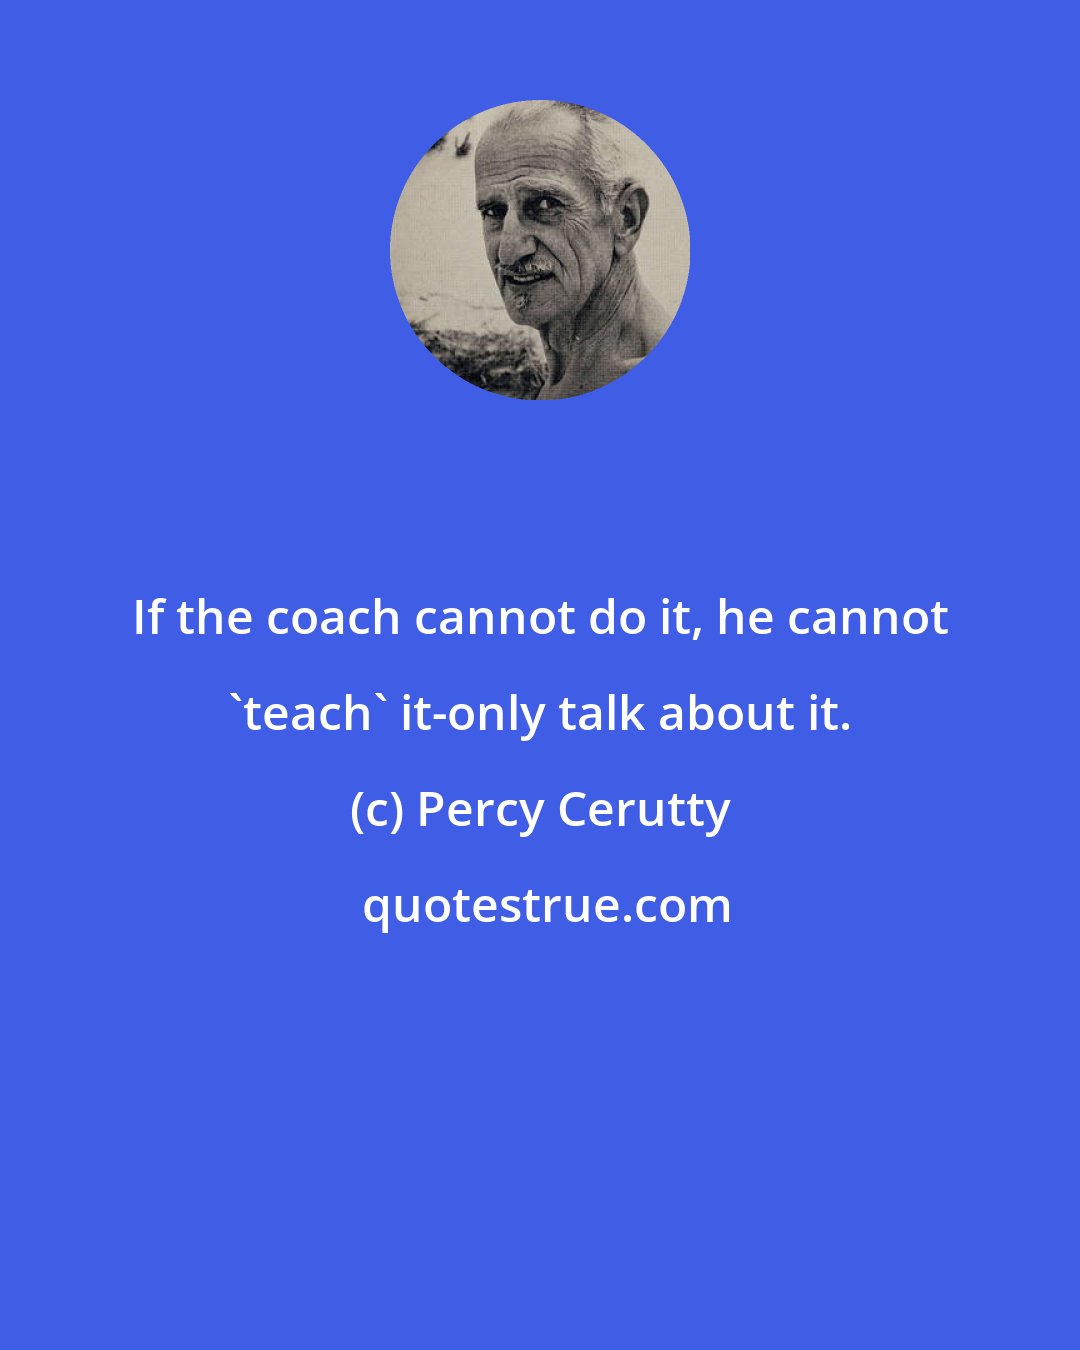 Percy Cerutty: If the coach cannot do it, he cannot 'teach' it-only talk about it.